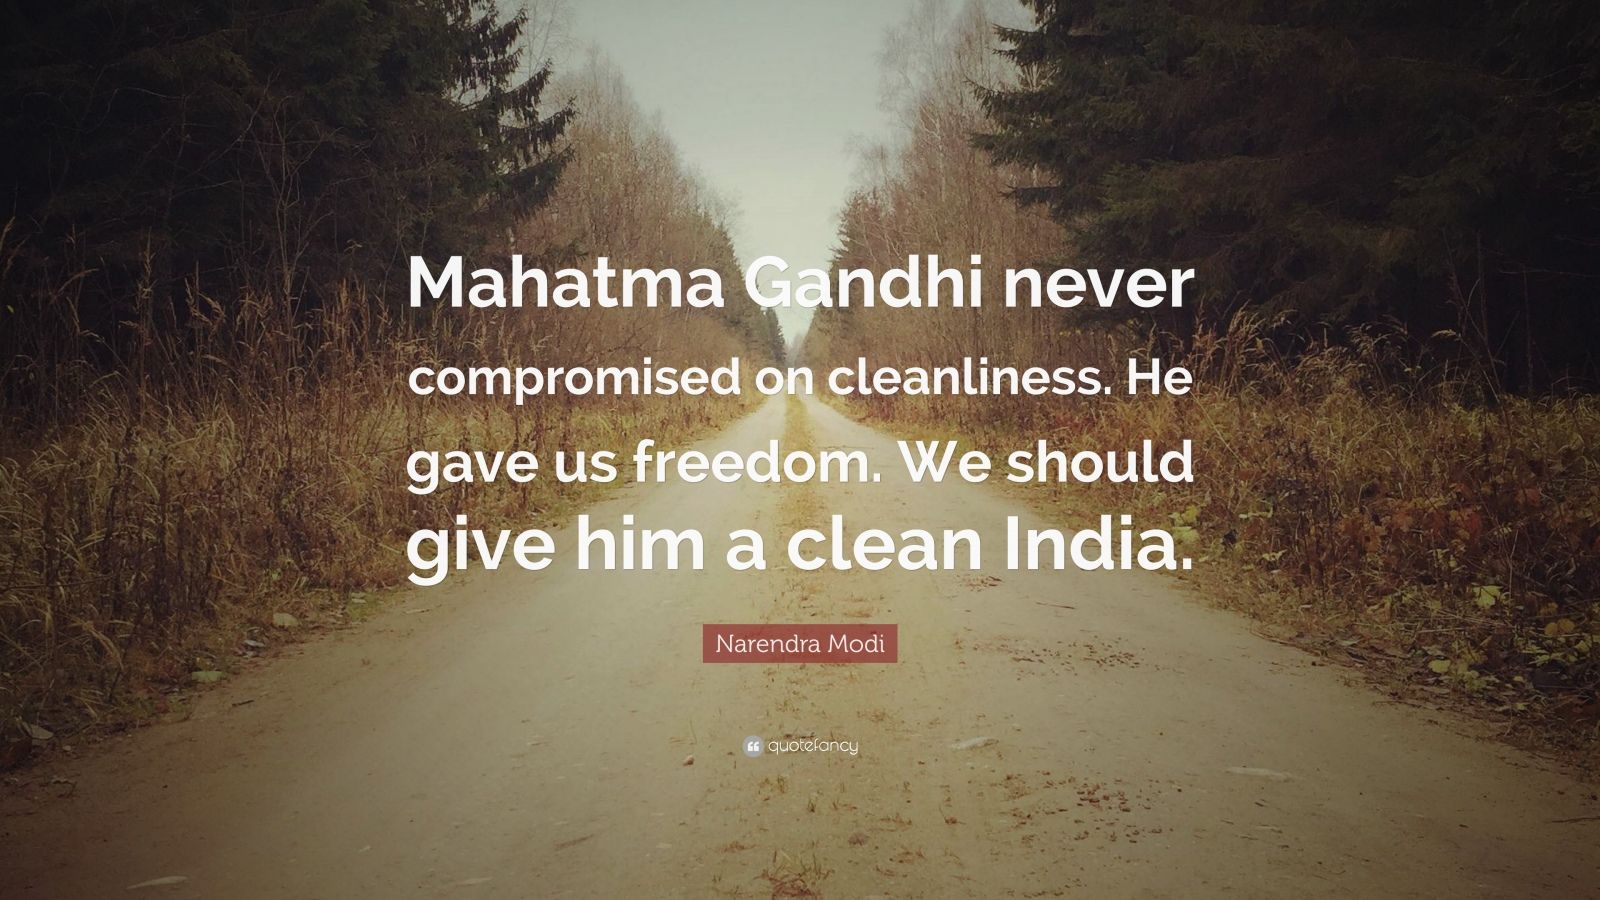 Narendra Modi Quote: “Mahatma Gandhi never compromised on cleanliness